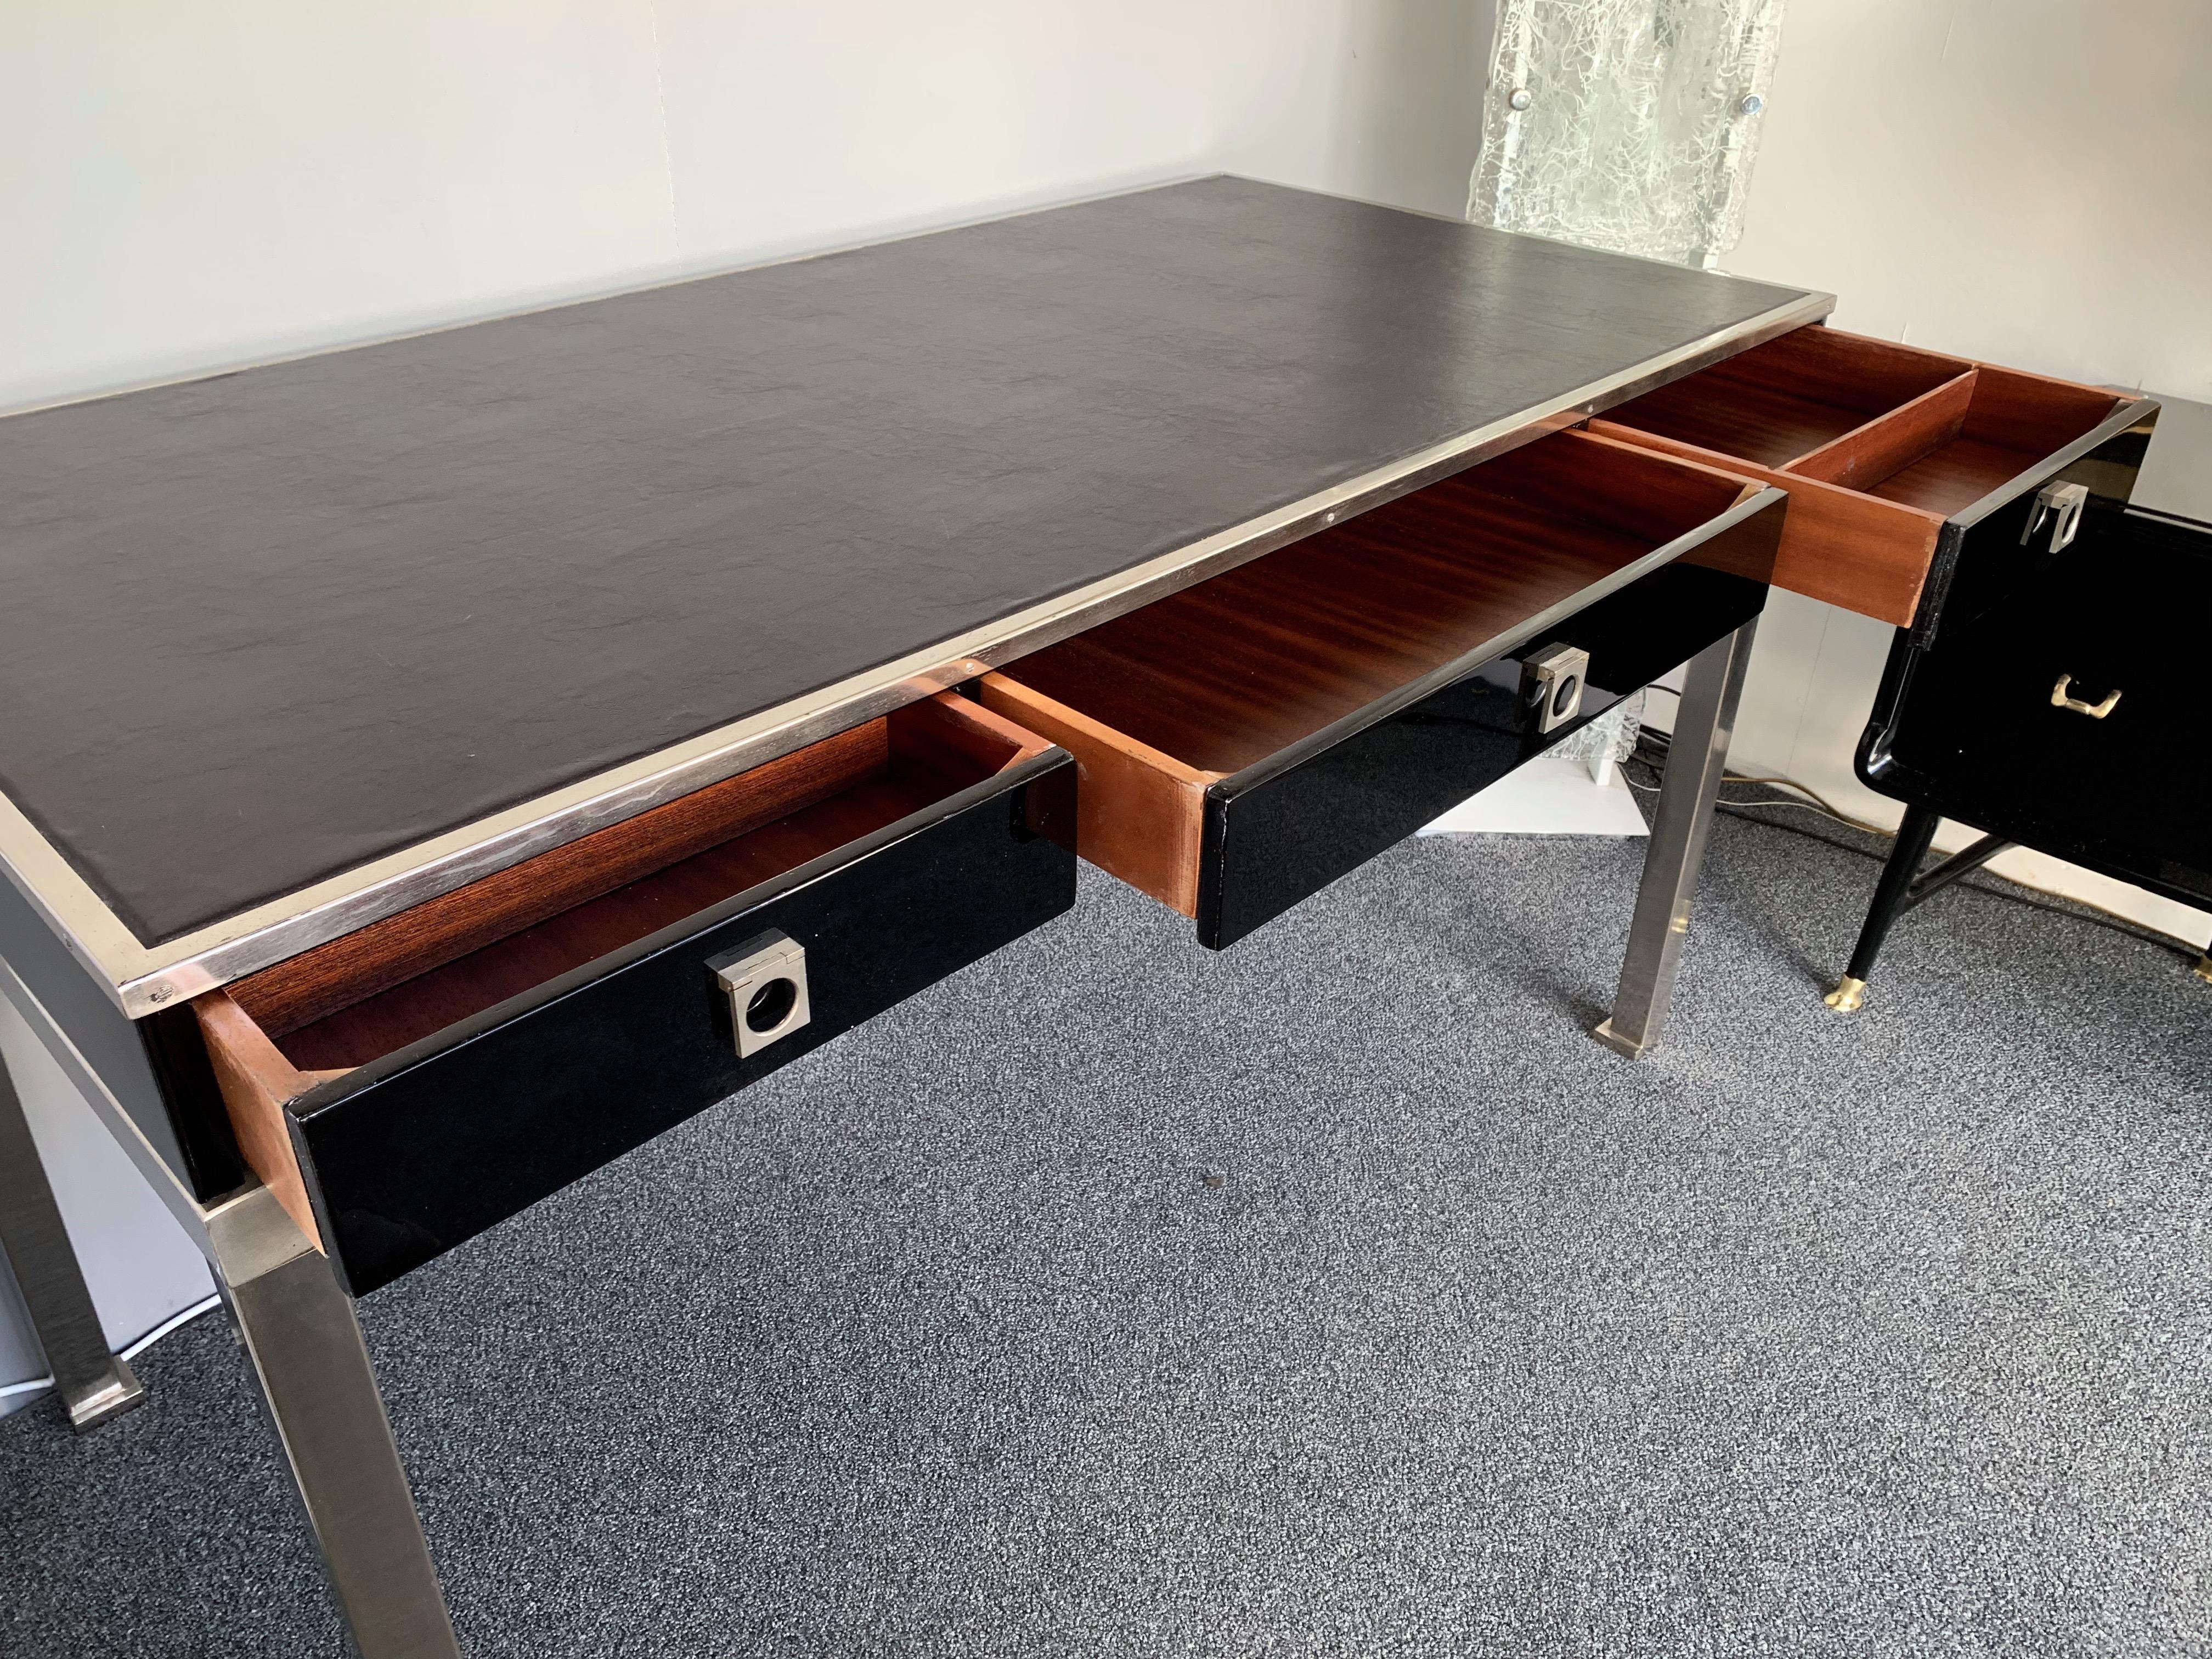 Black lacquered wood desk or writing table by Guy Lefevre. A part of his production was sold by Maison Jansen during the 1970s, black lacquer, nickeled brass feet. Famous manufacture like Jean Claude Mahey, Willy Rizzo, Bagues, Hollywood Regency,